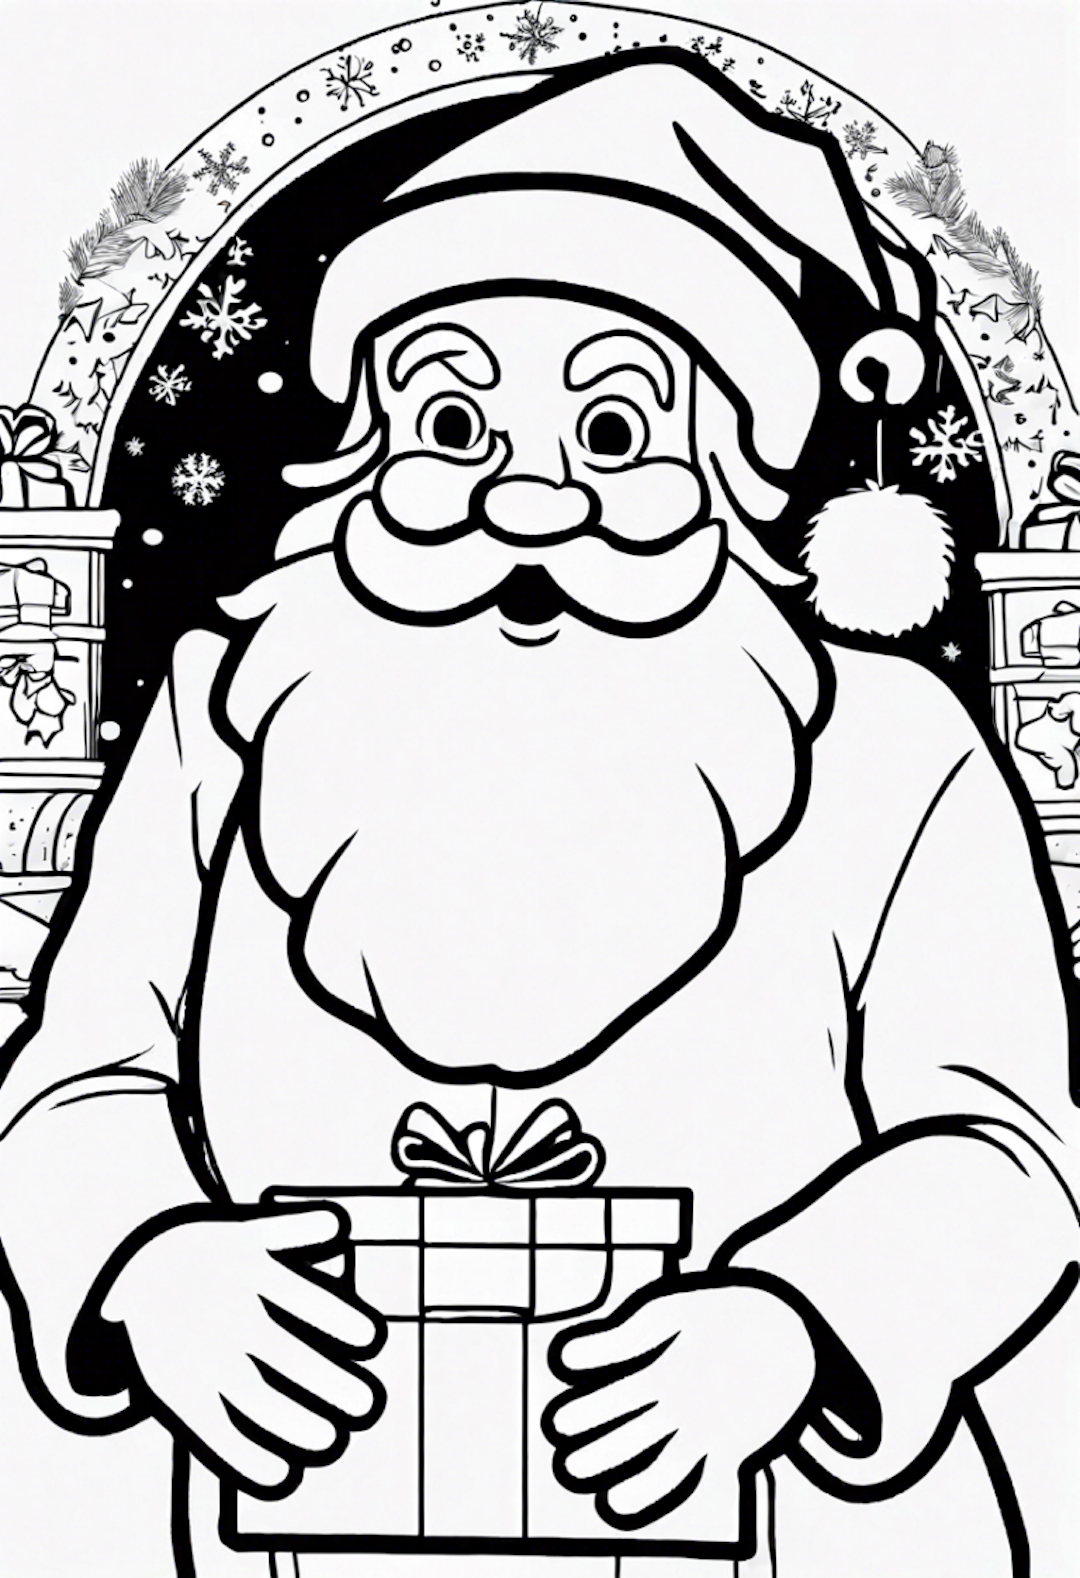 Santa Claus with a Gift coloring pages